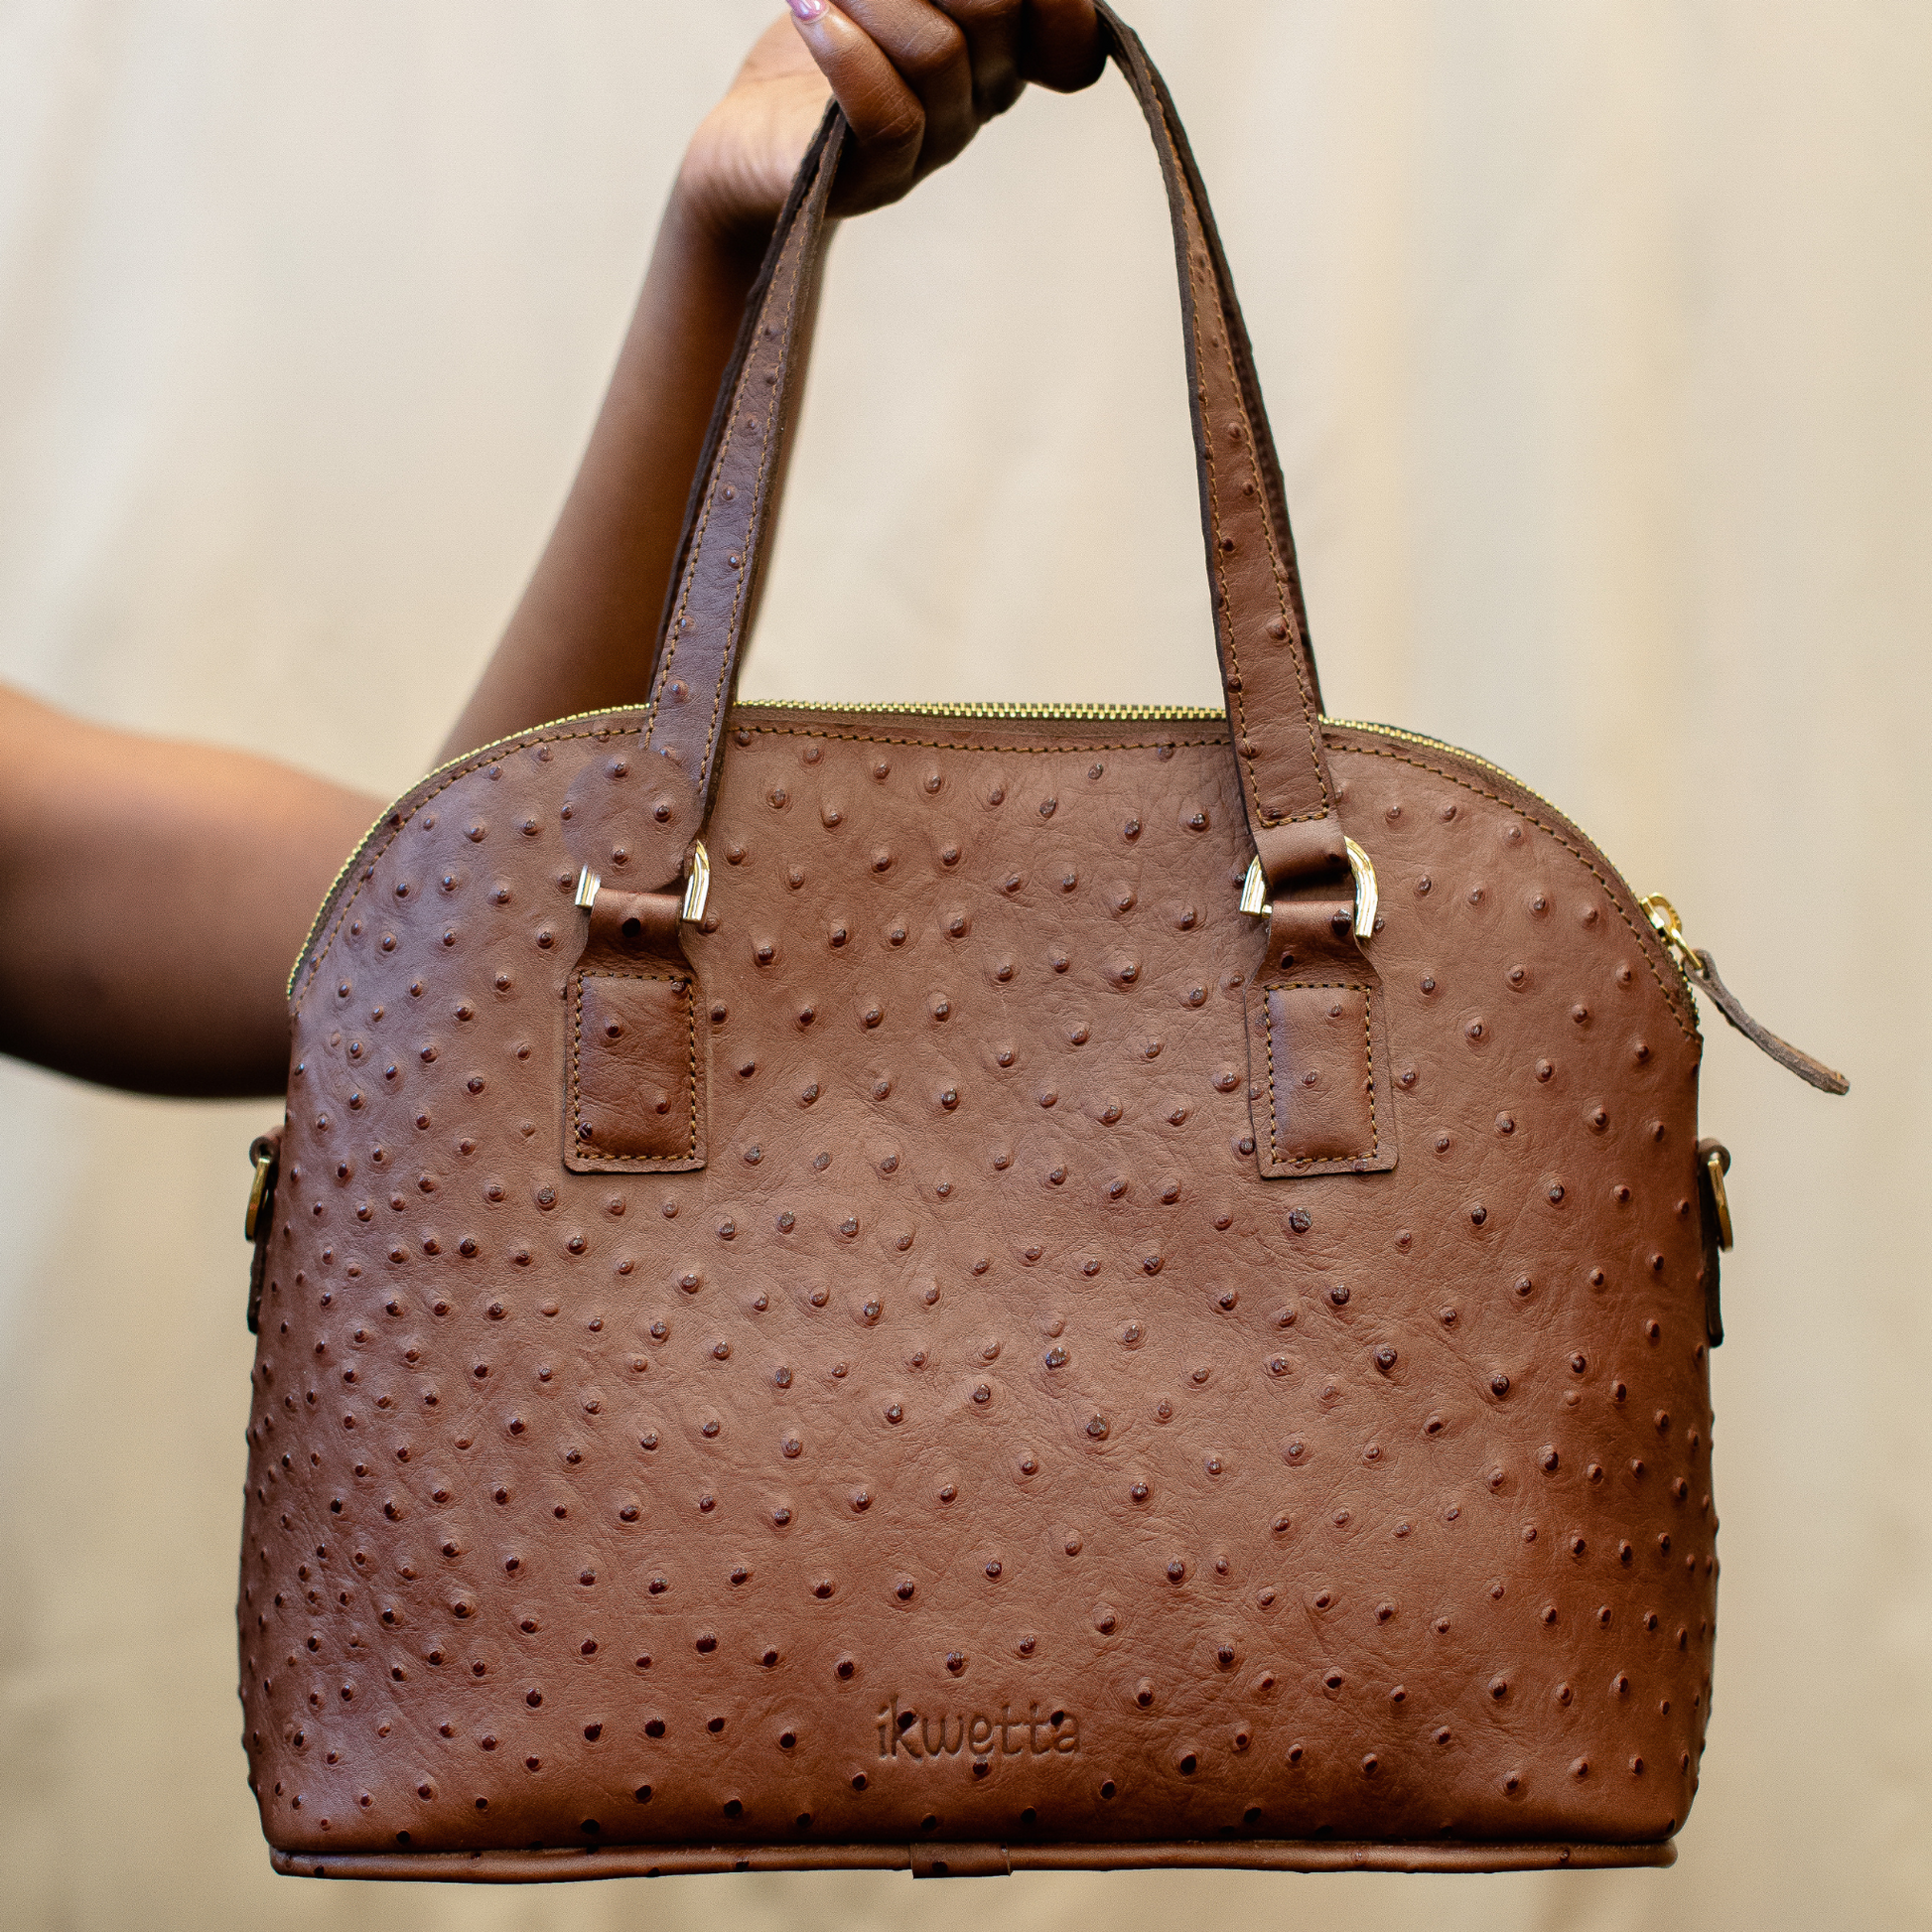 Spade bag in Brown ostrich print leather